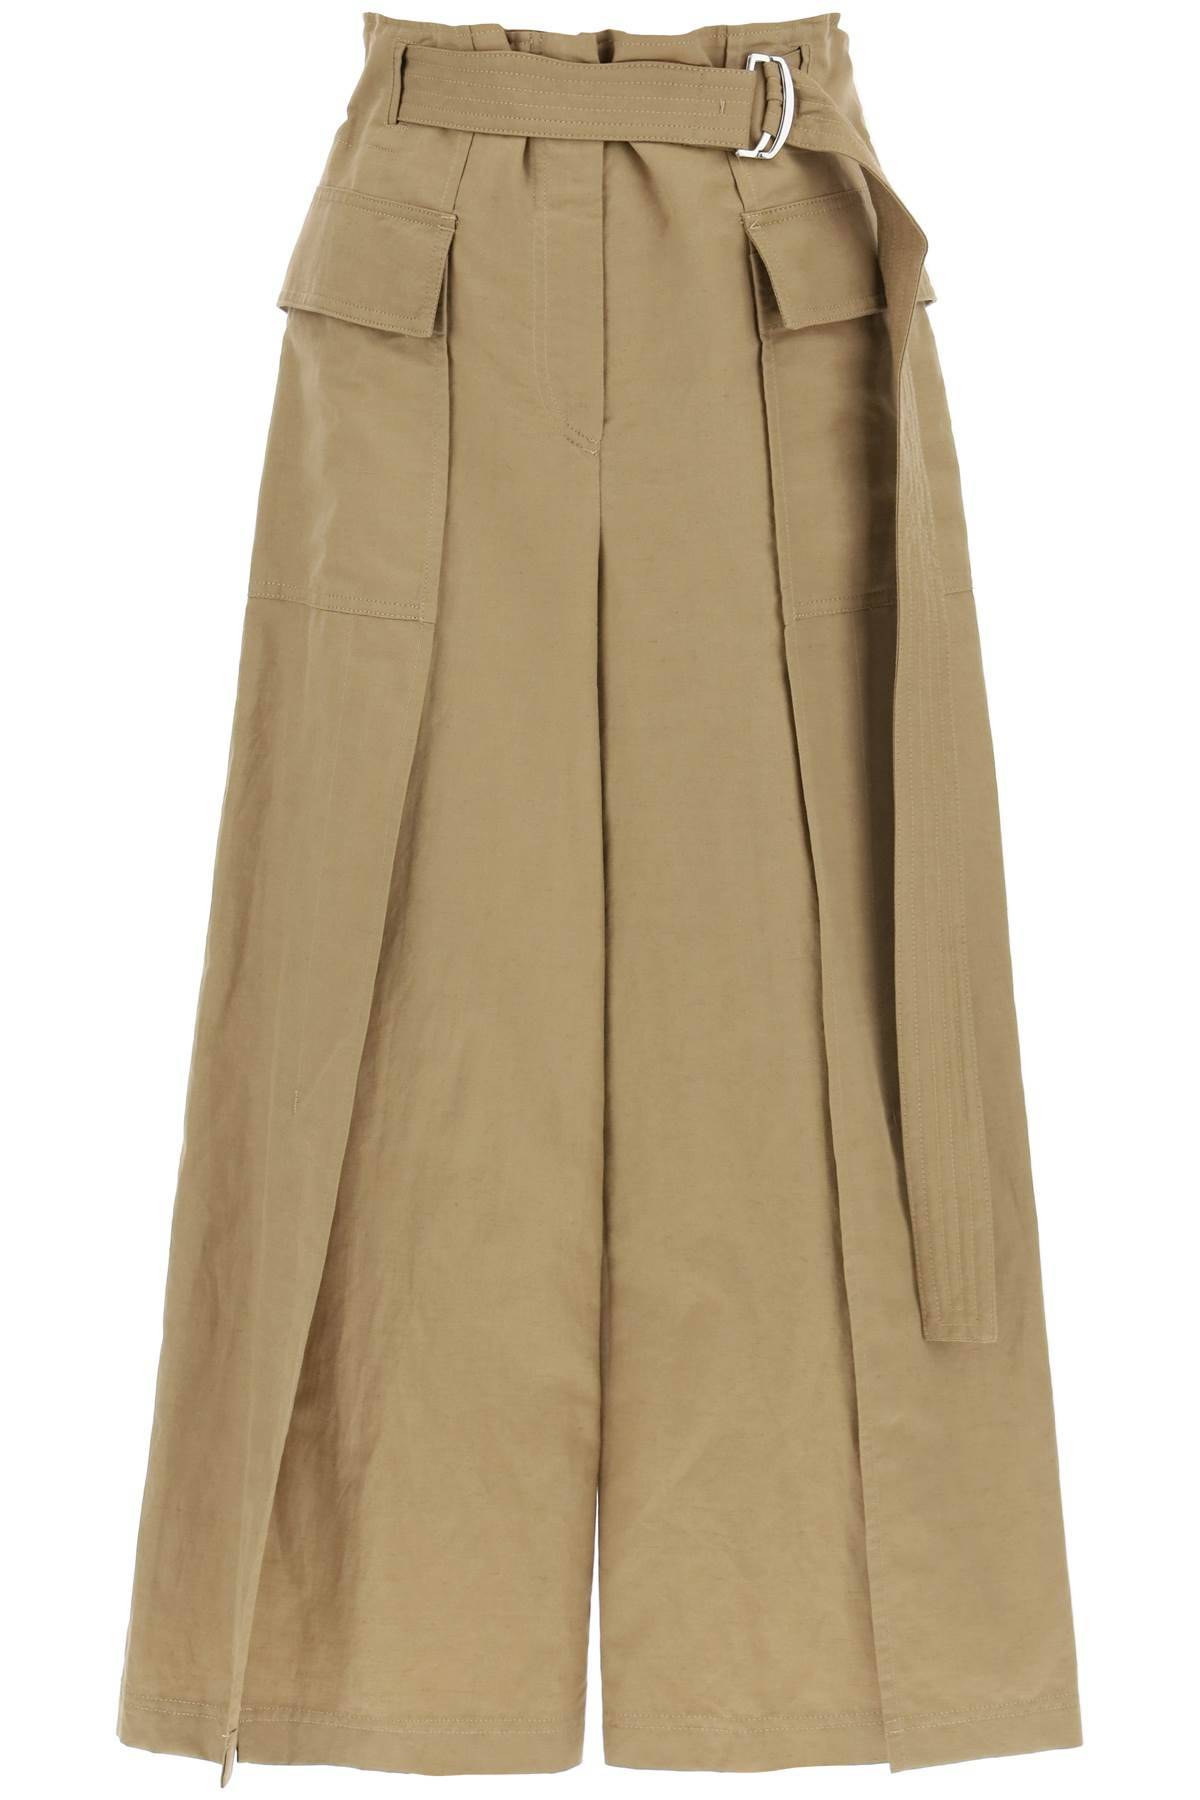 Weekend Max Mara WEEKEND MAX MARA flared linen and cotton trousers